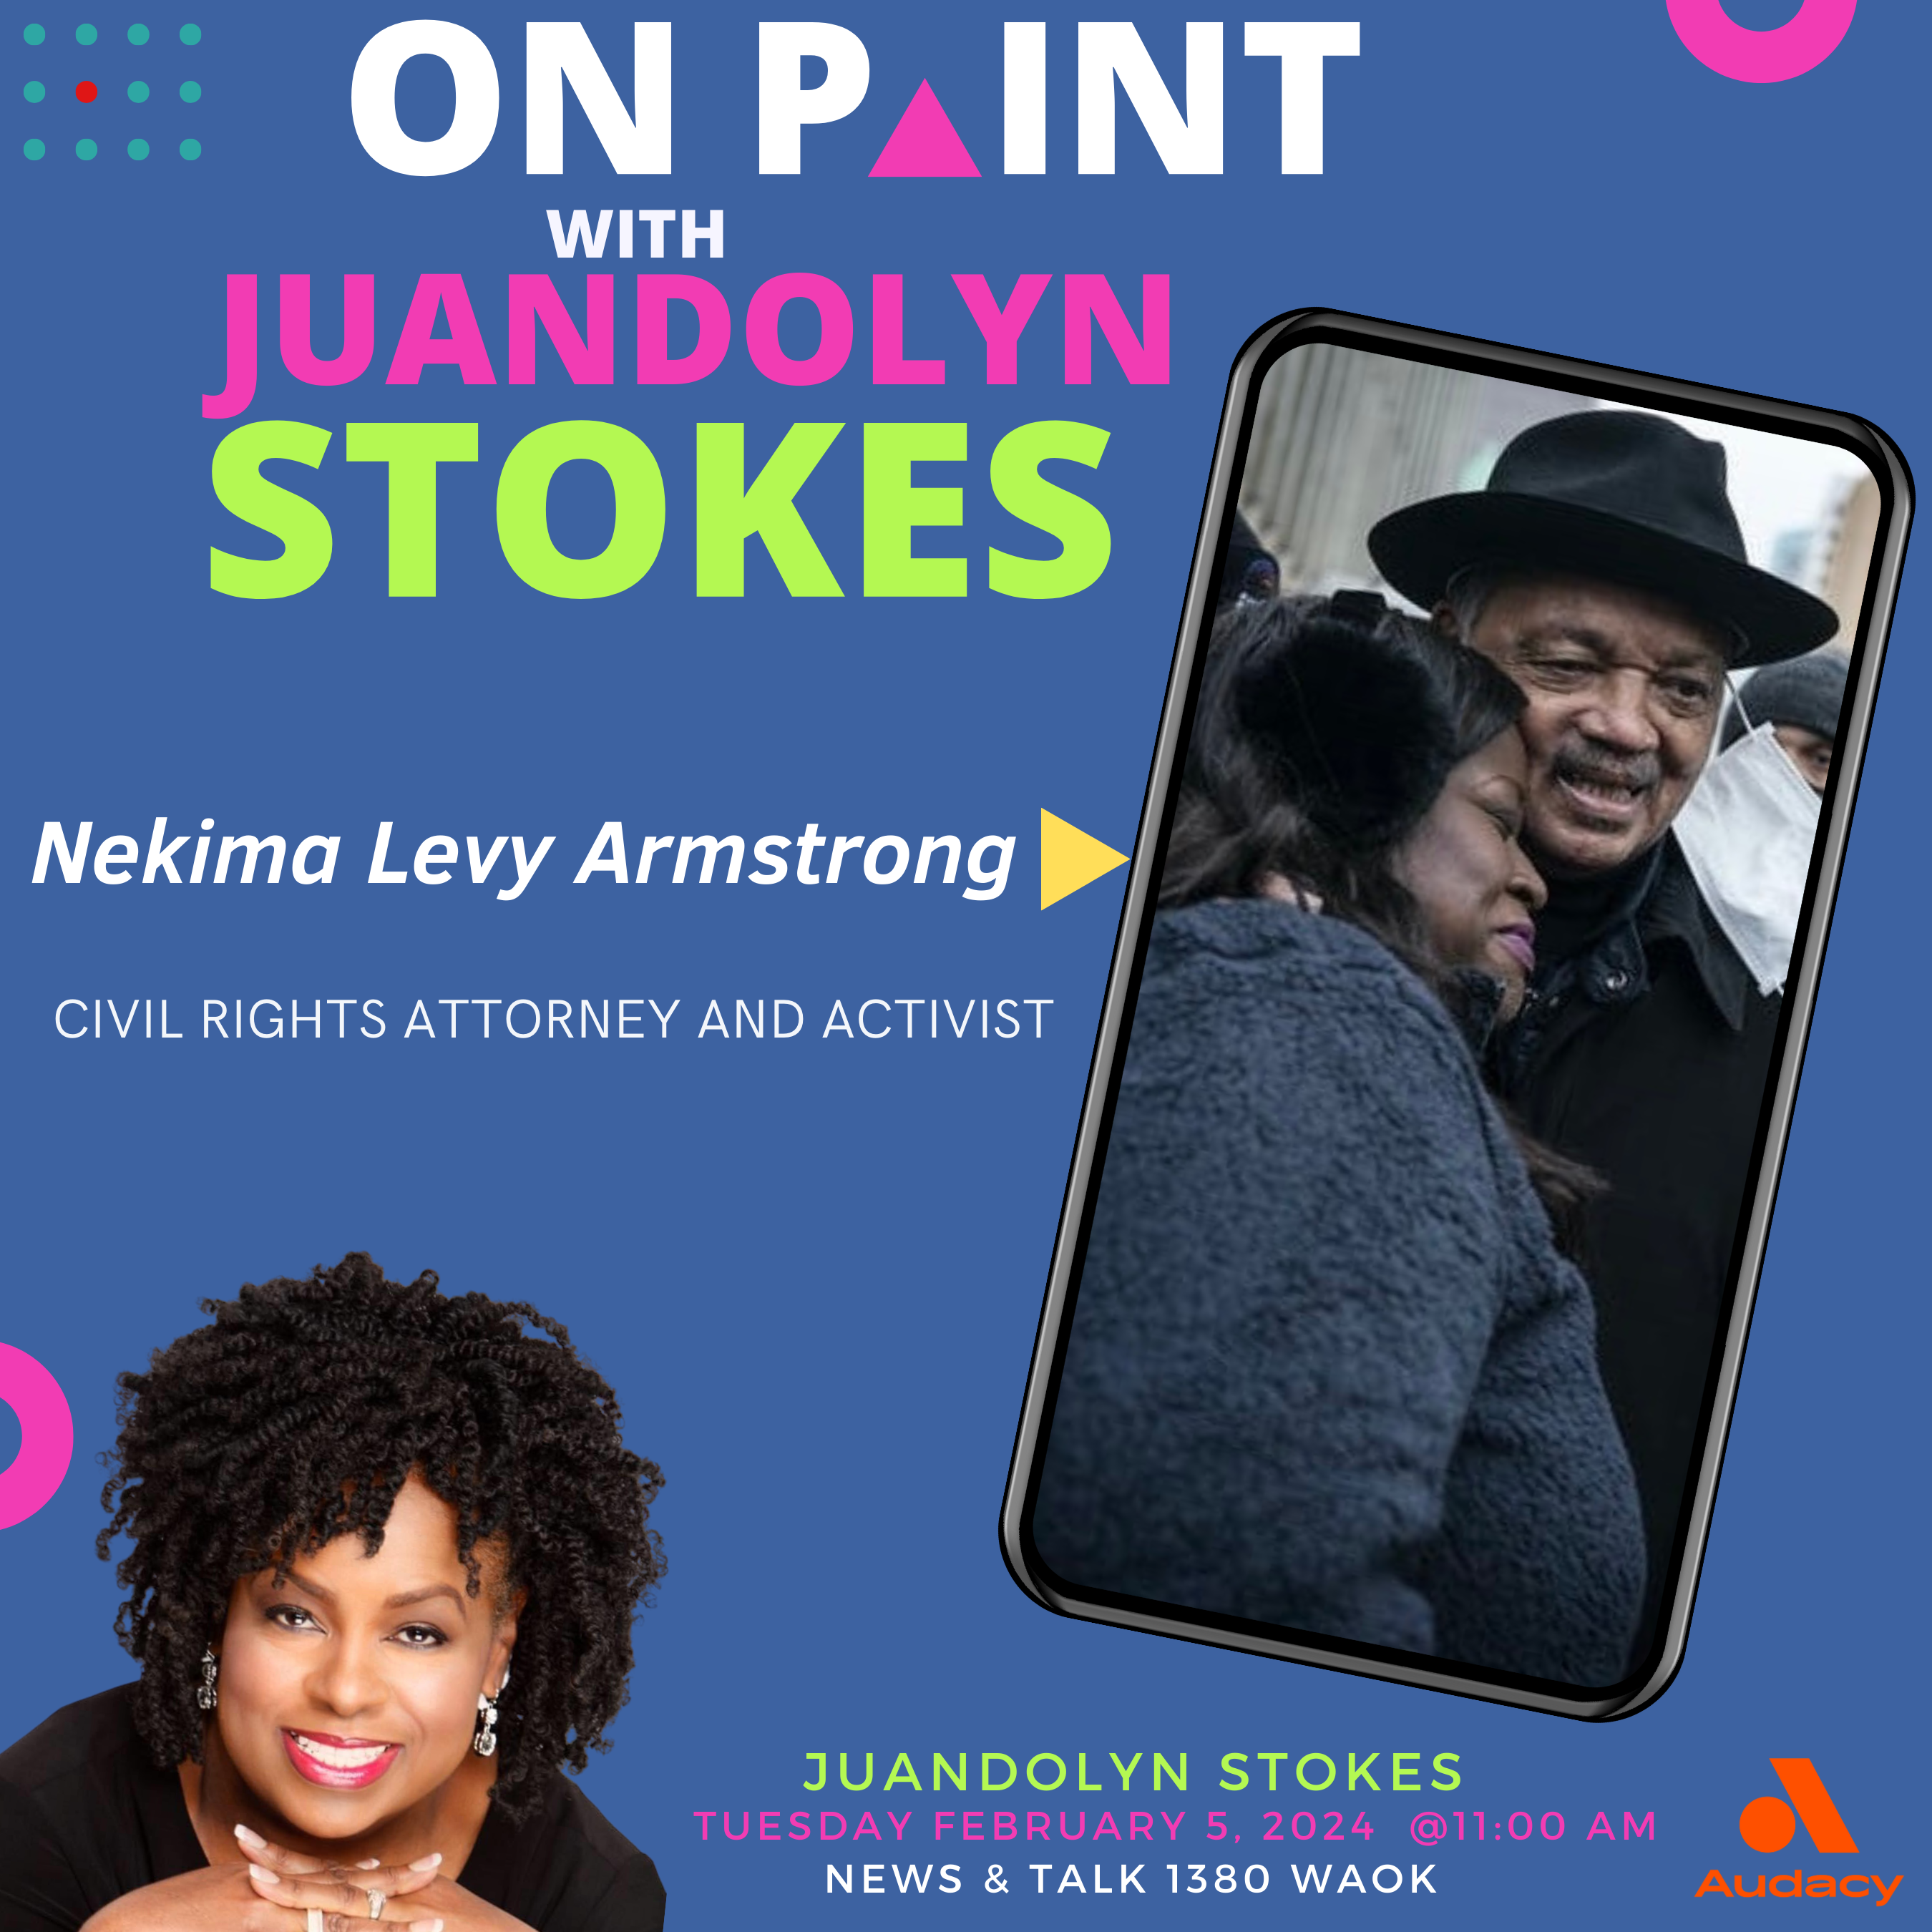 The Evolution of the Civil Rights Movement -  Attorney & Activist Nekima Levy Armstrong joins Juandolyn Stokes